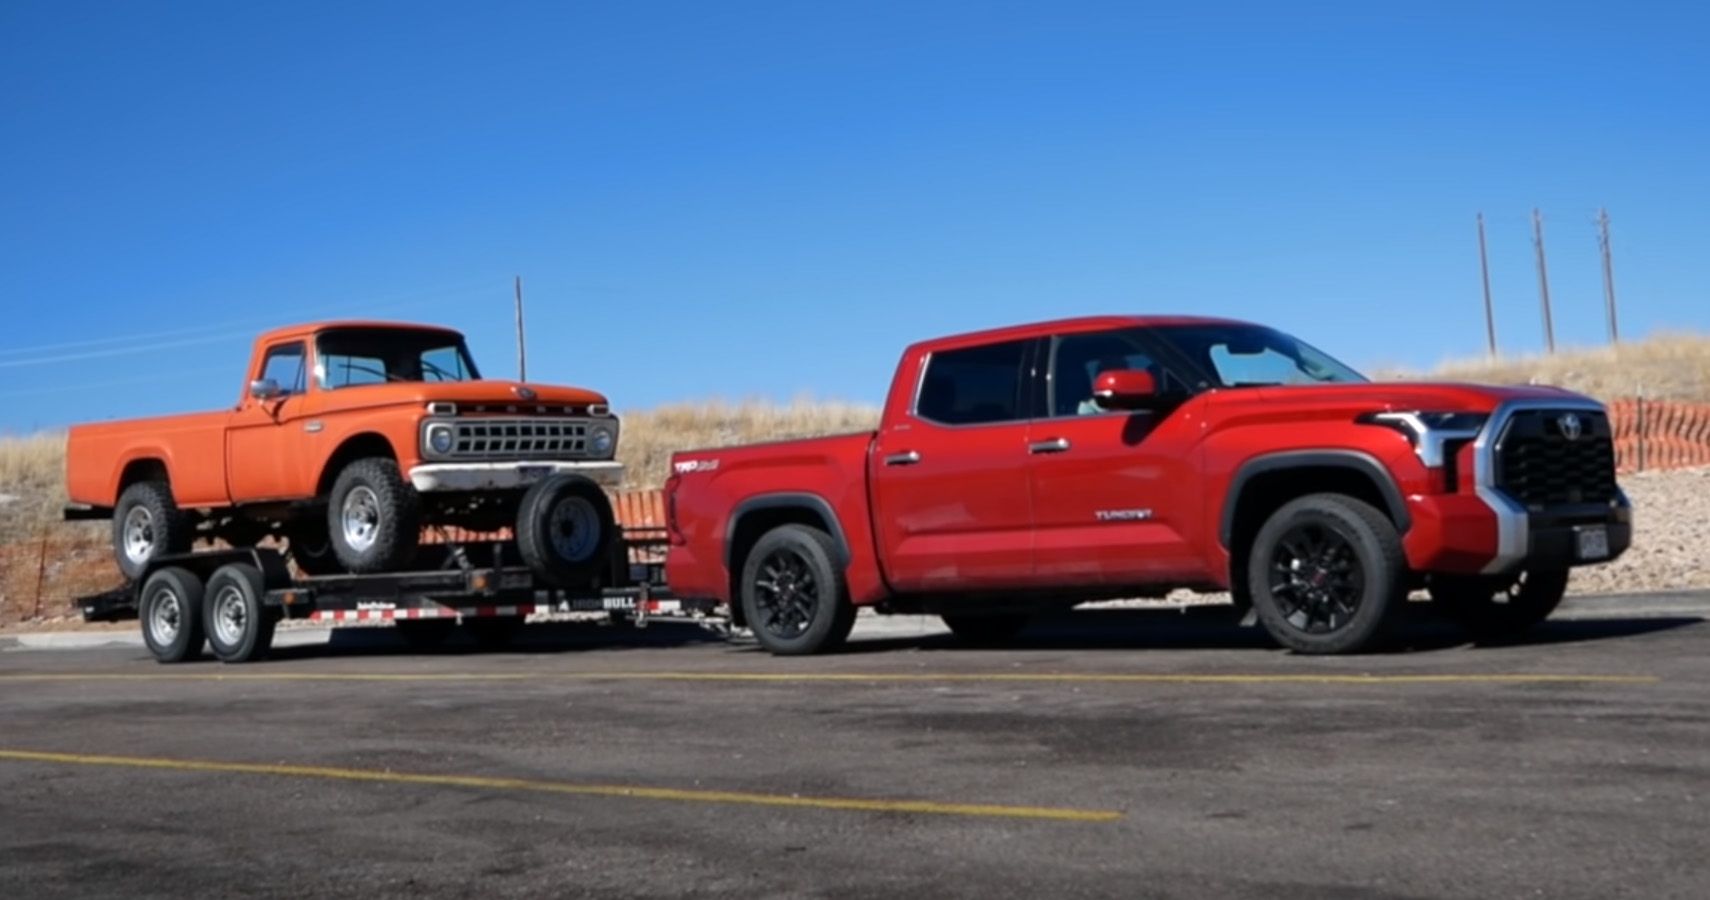 Red 2022 Toyota Tundra pulling an orange Ford F-100